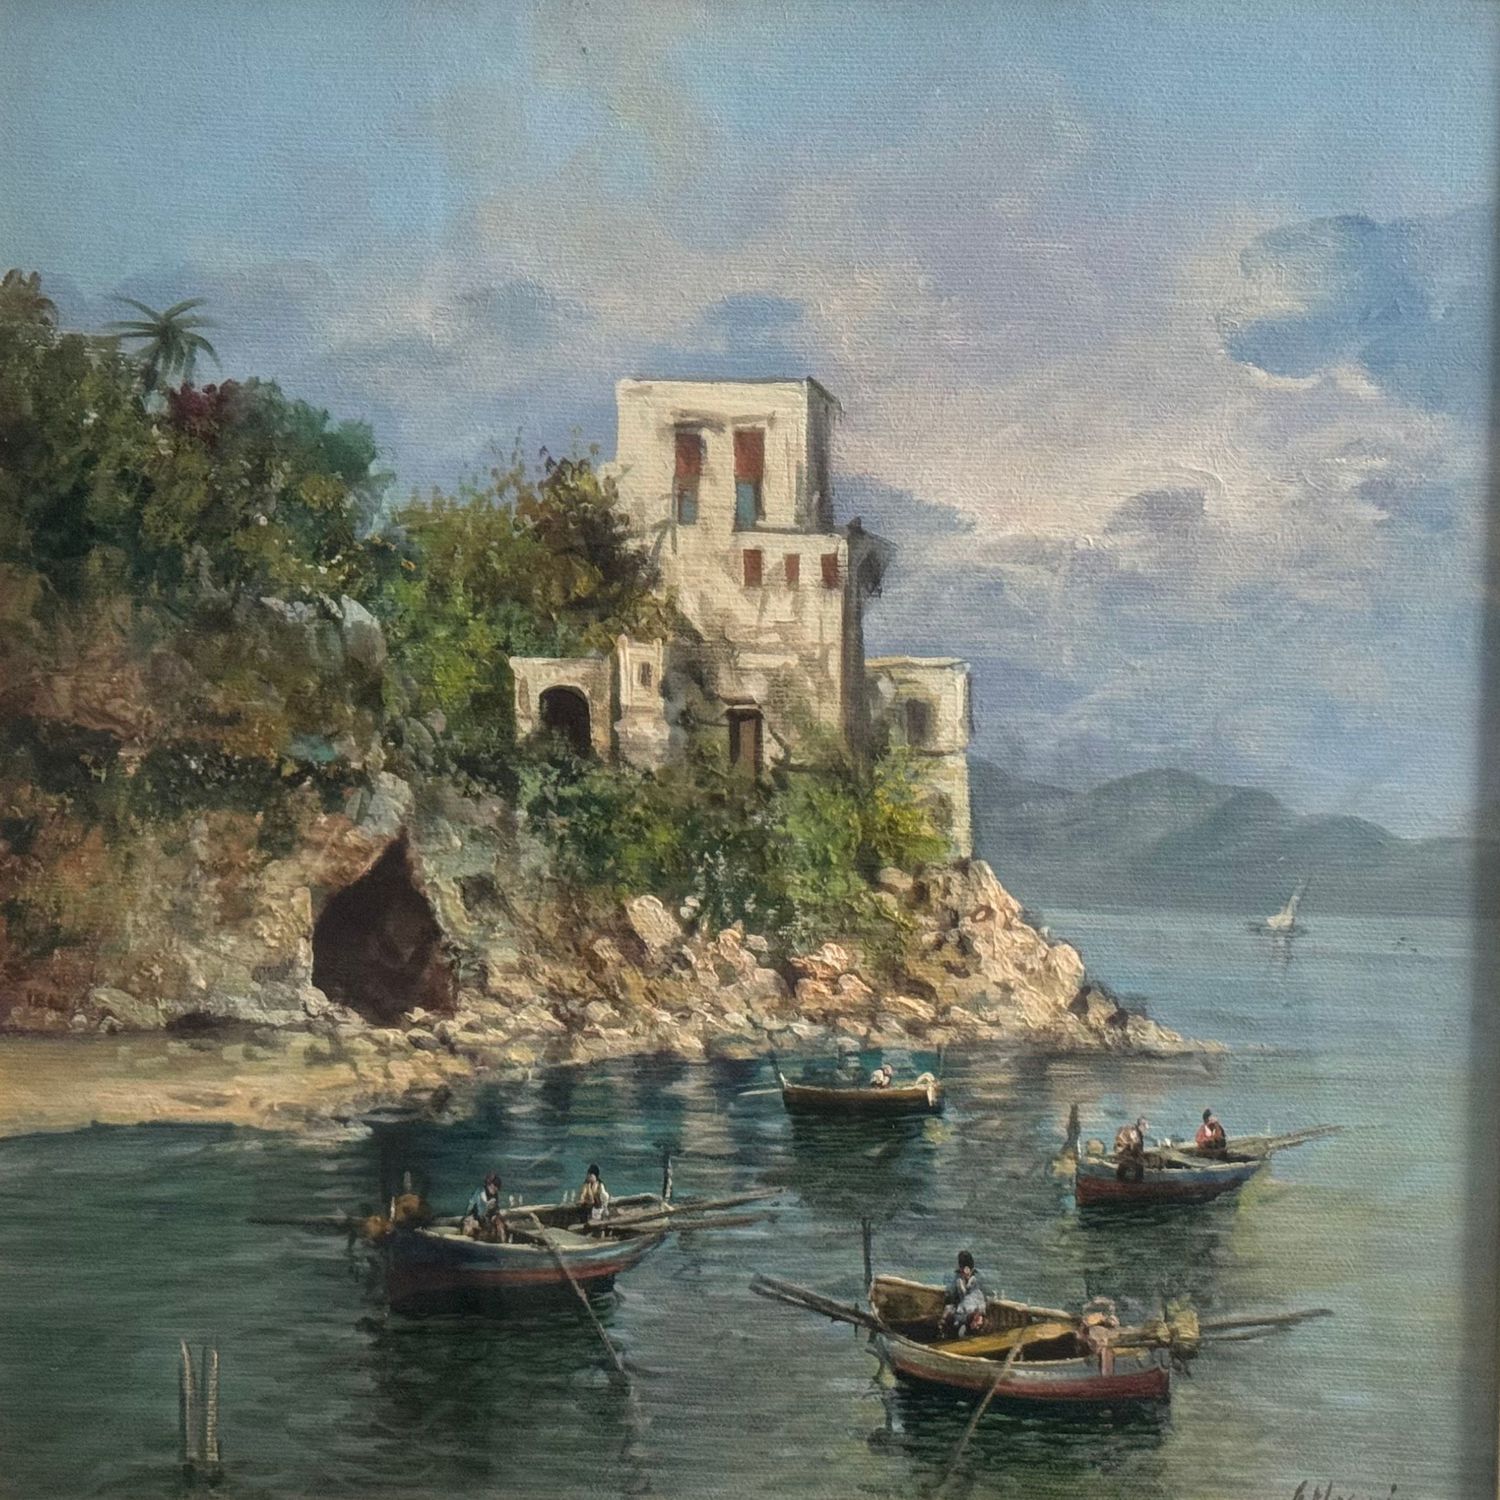 G. Masini - Glimpse of the seaside with boats - Image 3 of 5